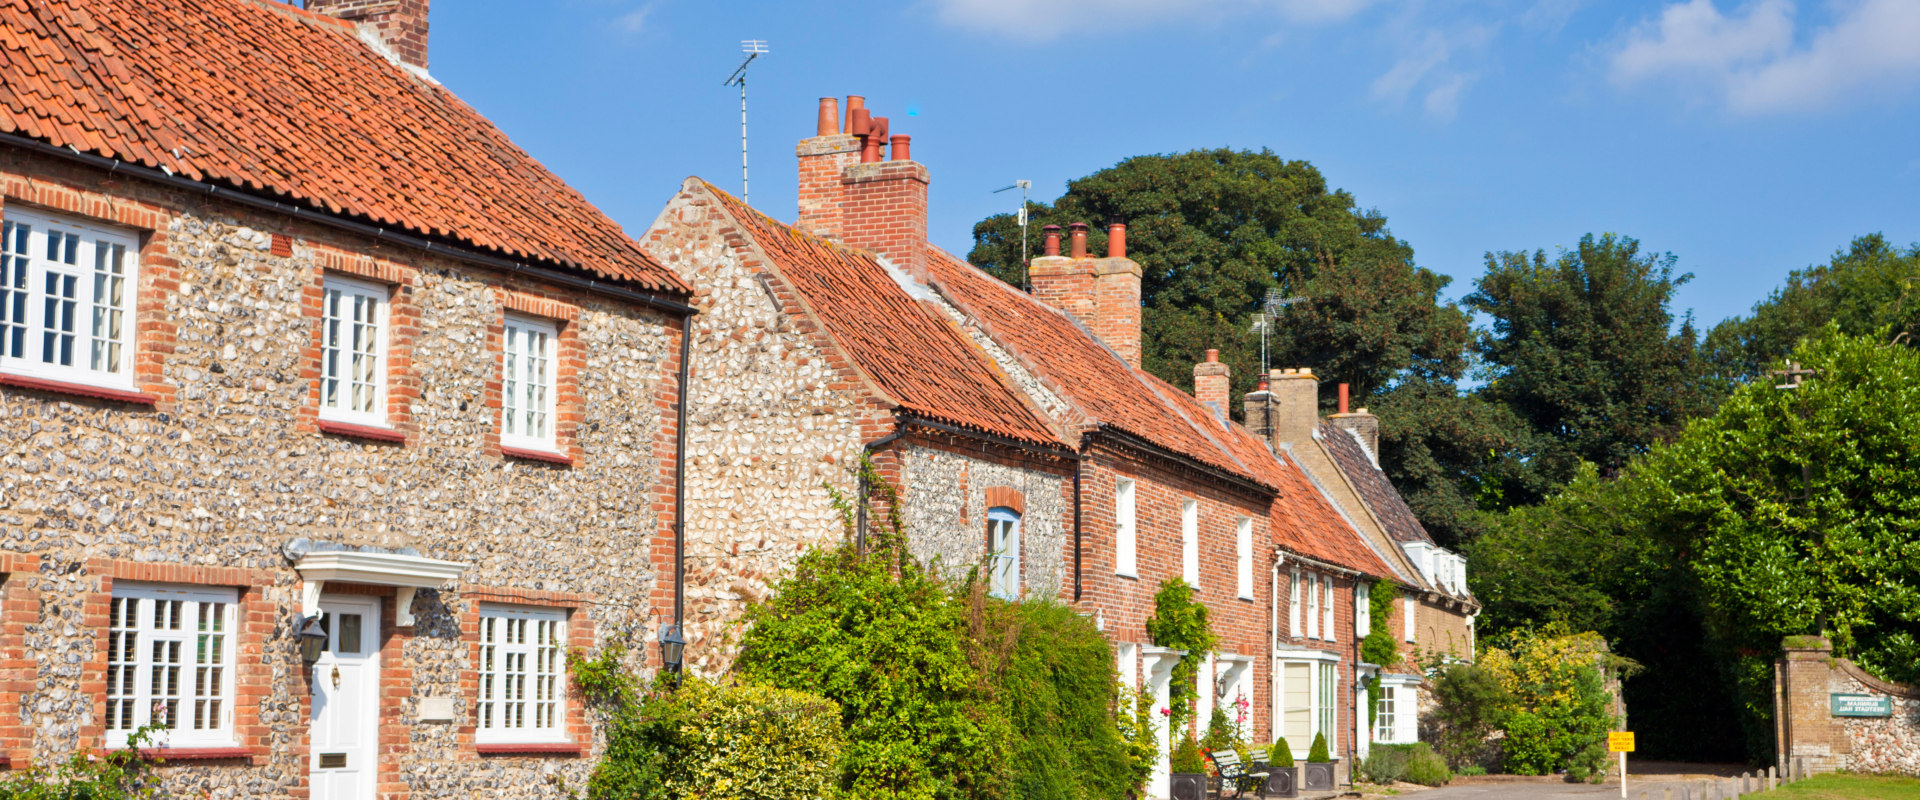 Why are houses being sold so fast uk?